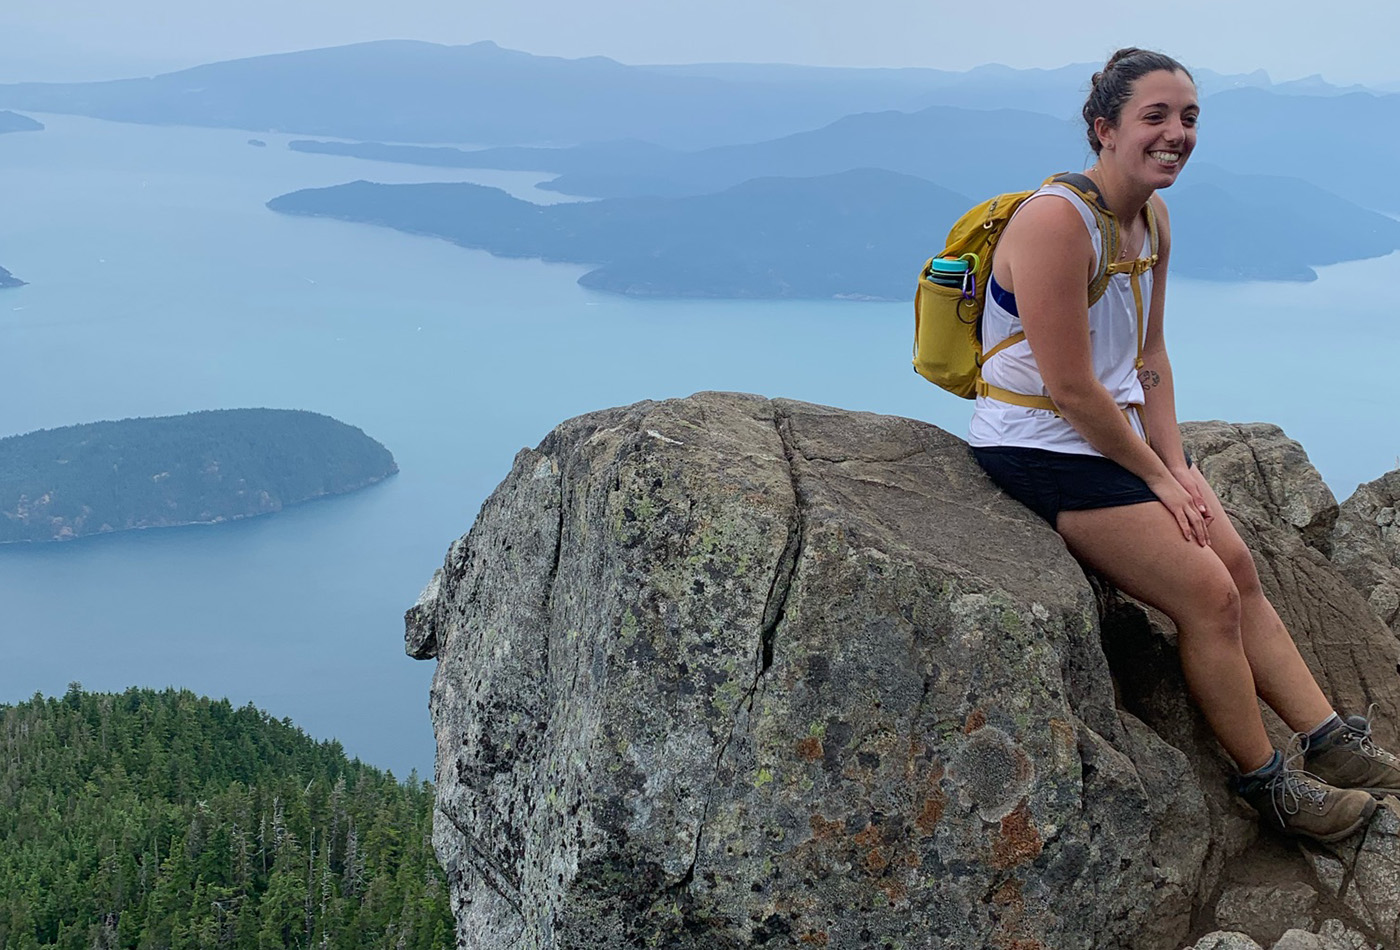 A graduate student smiles on a rock atop a mountain overlooking a lake.